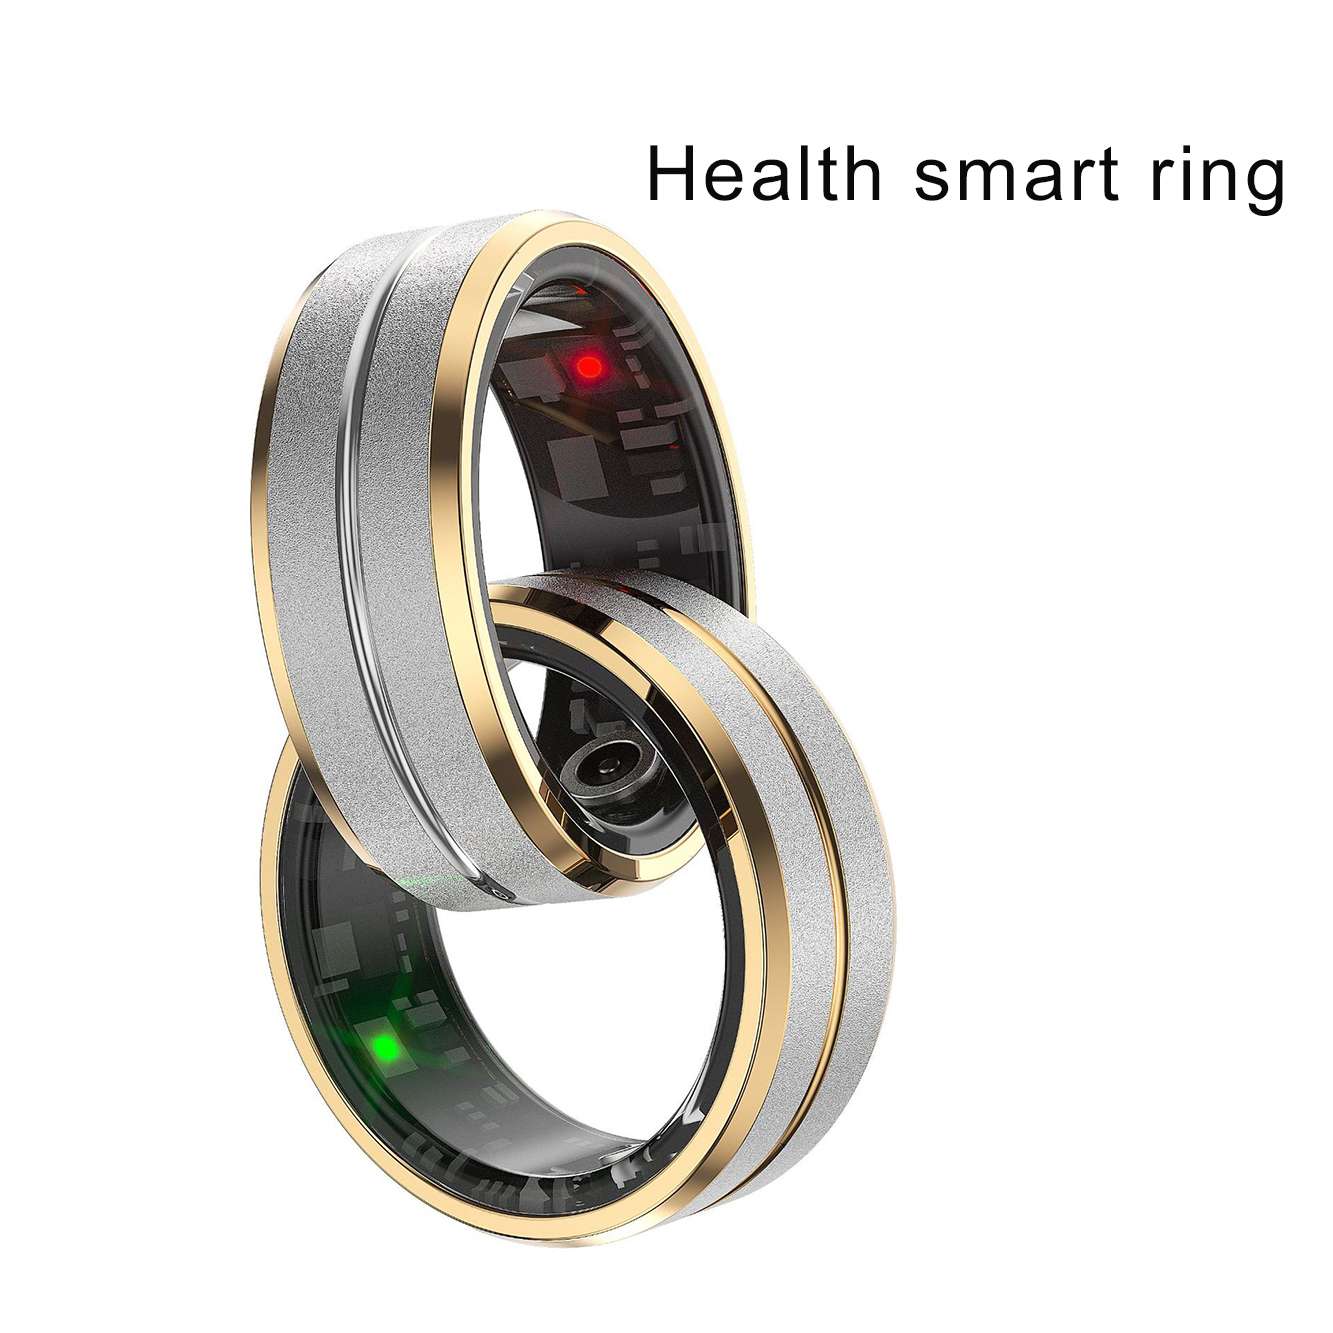 Health smart ring for blood oxyen testing, sleep and heart rate tracking